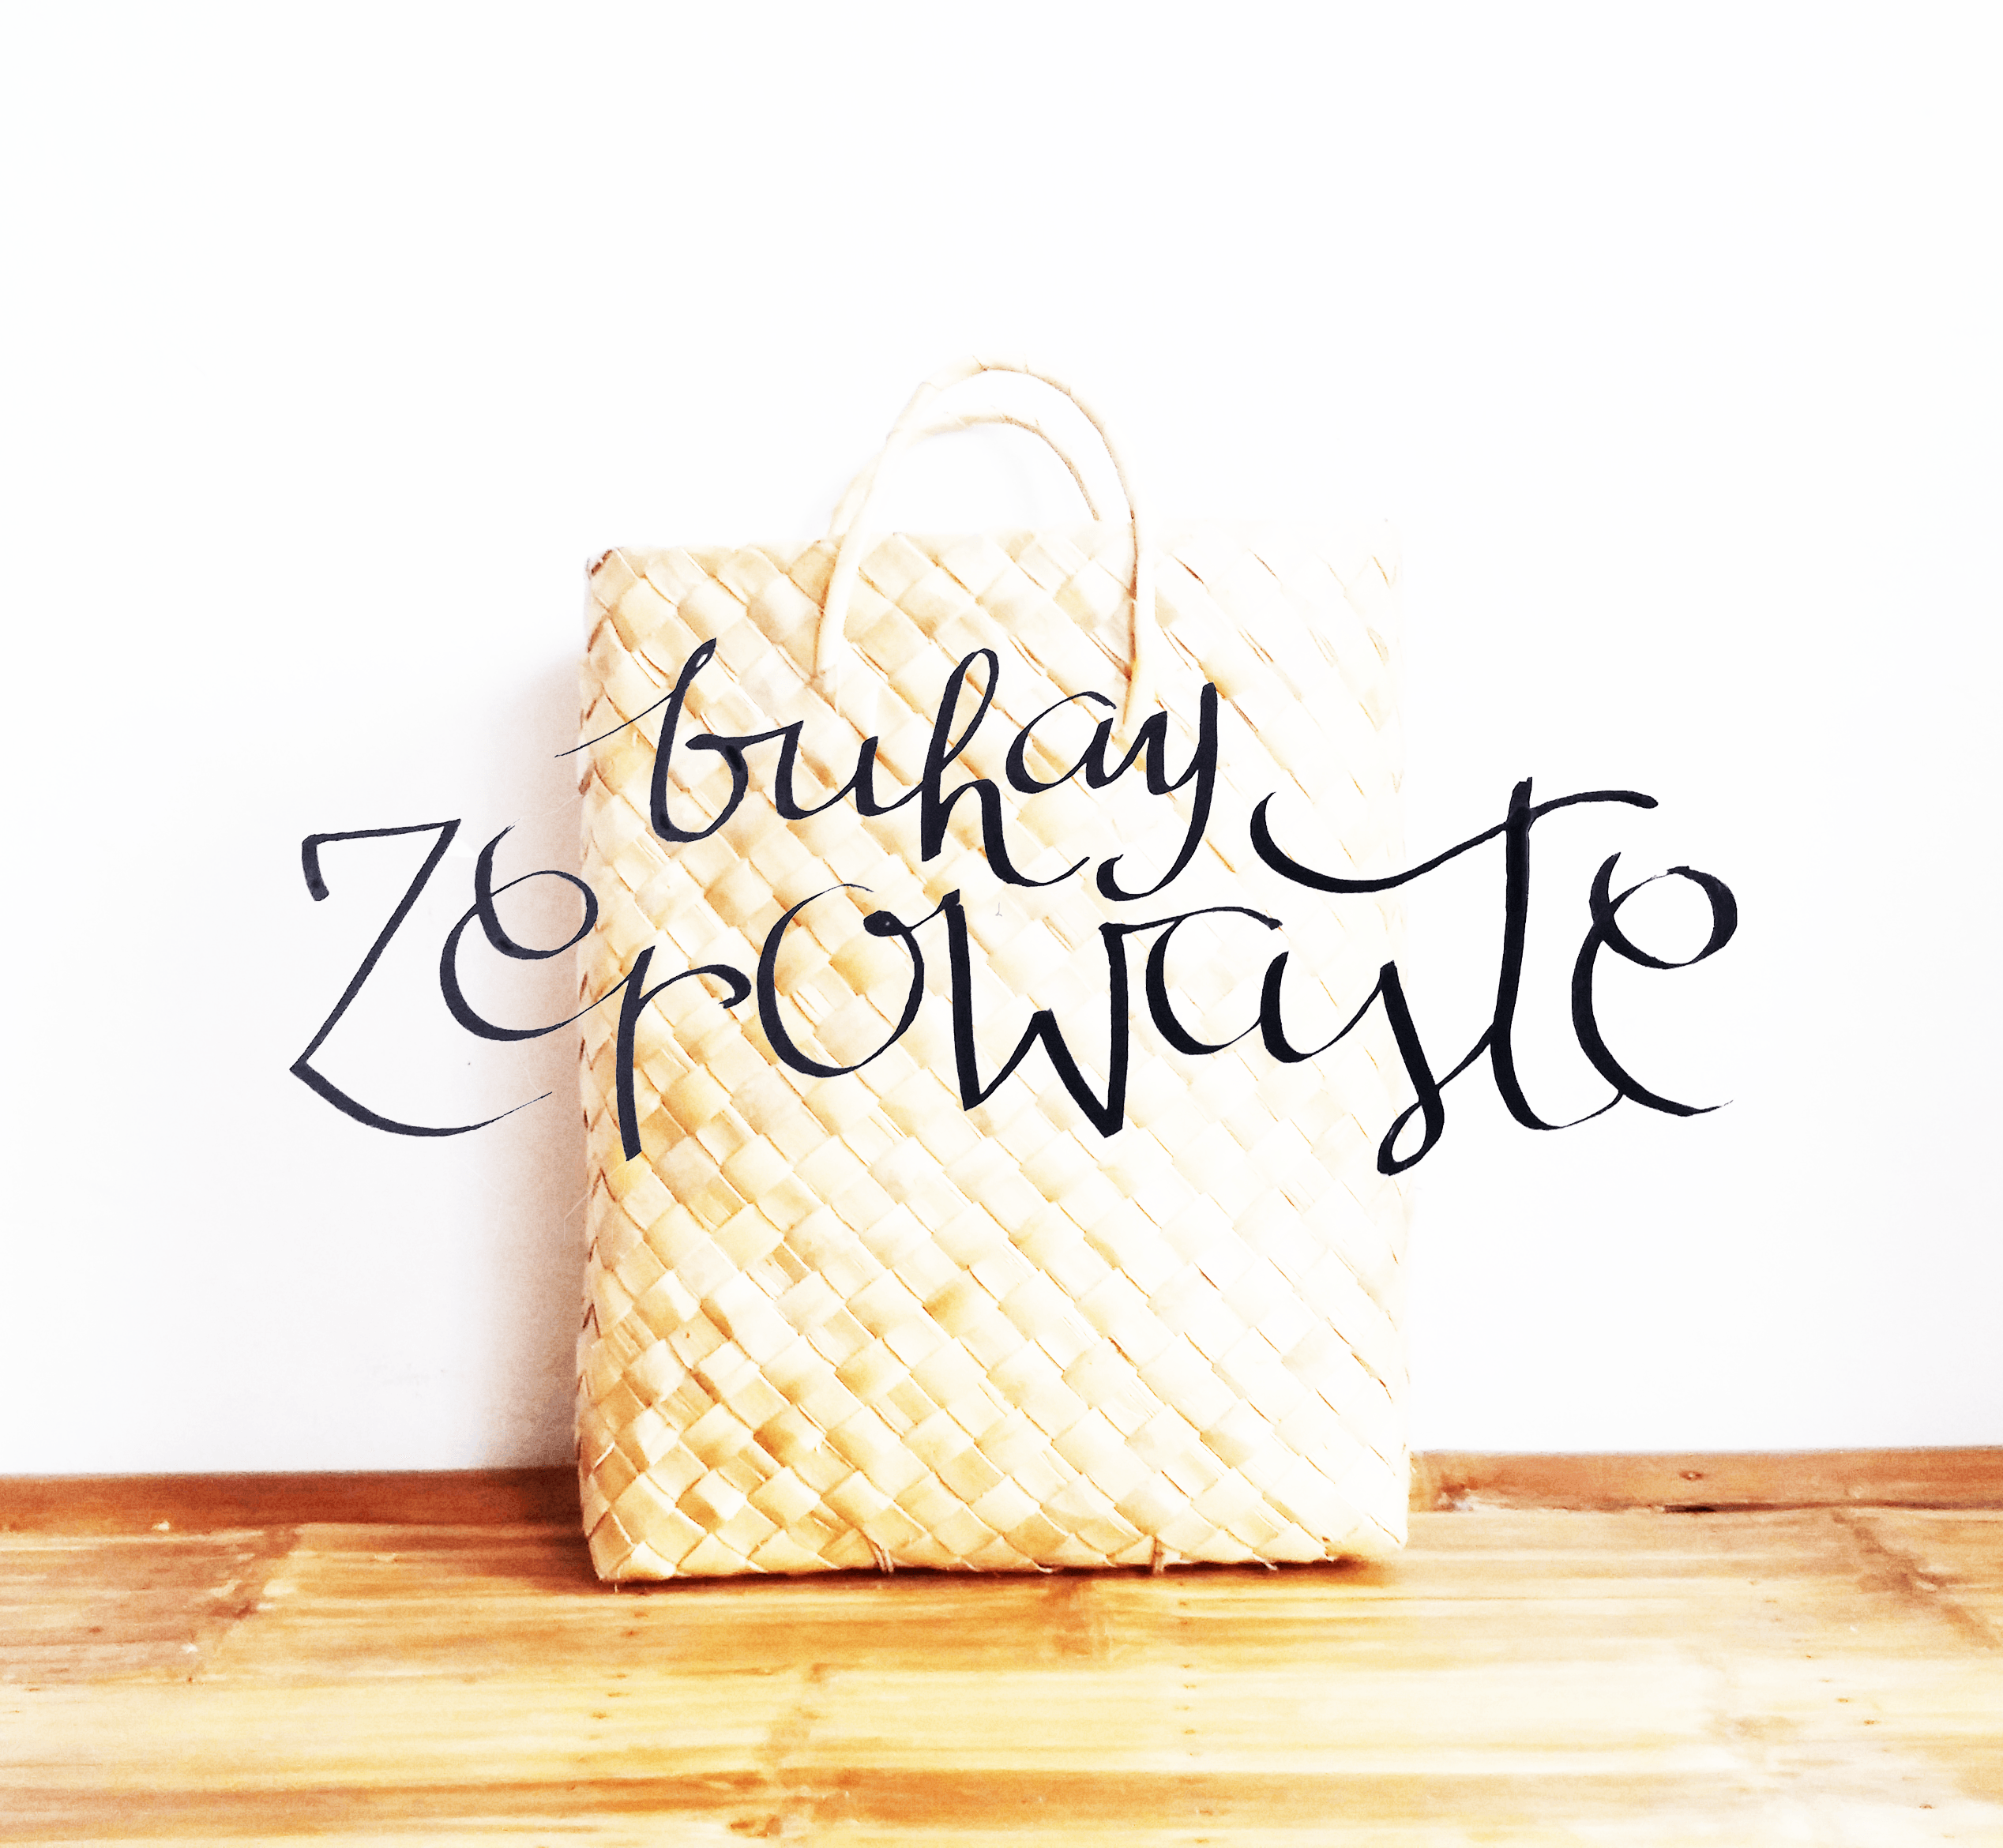 BZW. The Buhay Zero Waste is an online community that encourages Filipinos to produce the smallest possible amount of waste in their daily lives.  